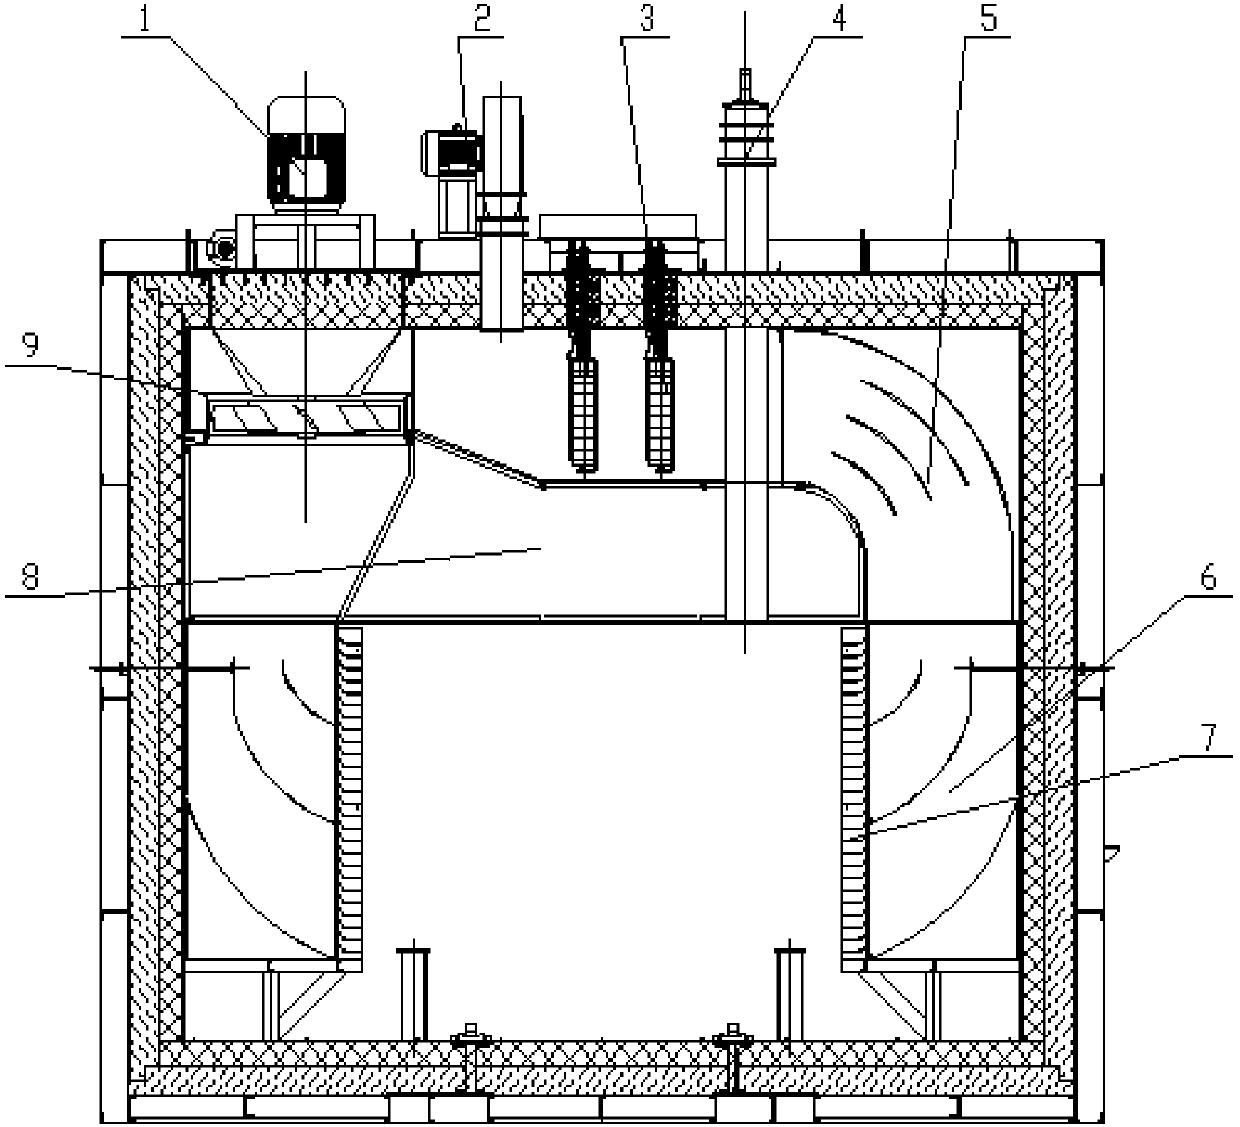 Gas circulation flow-guiding system used for heat treatment furnace